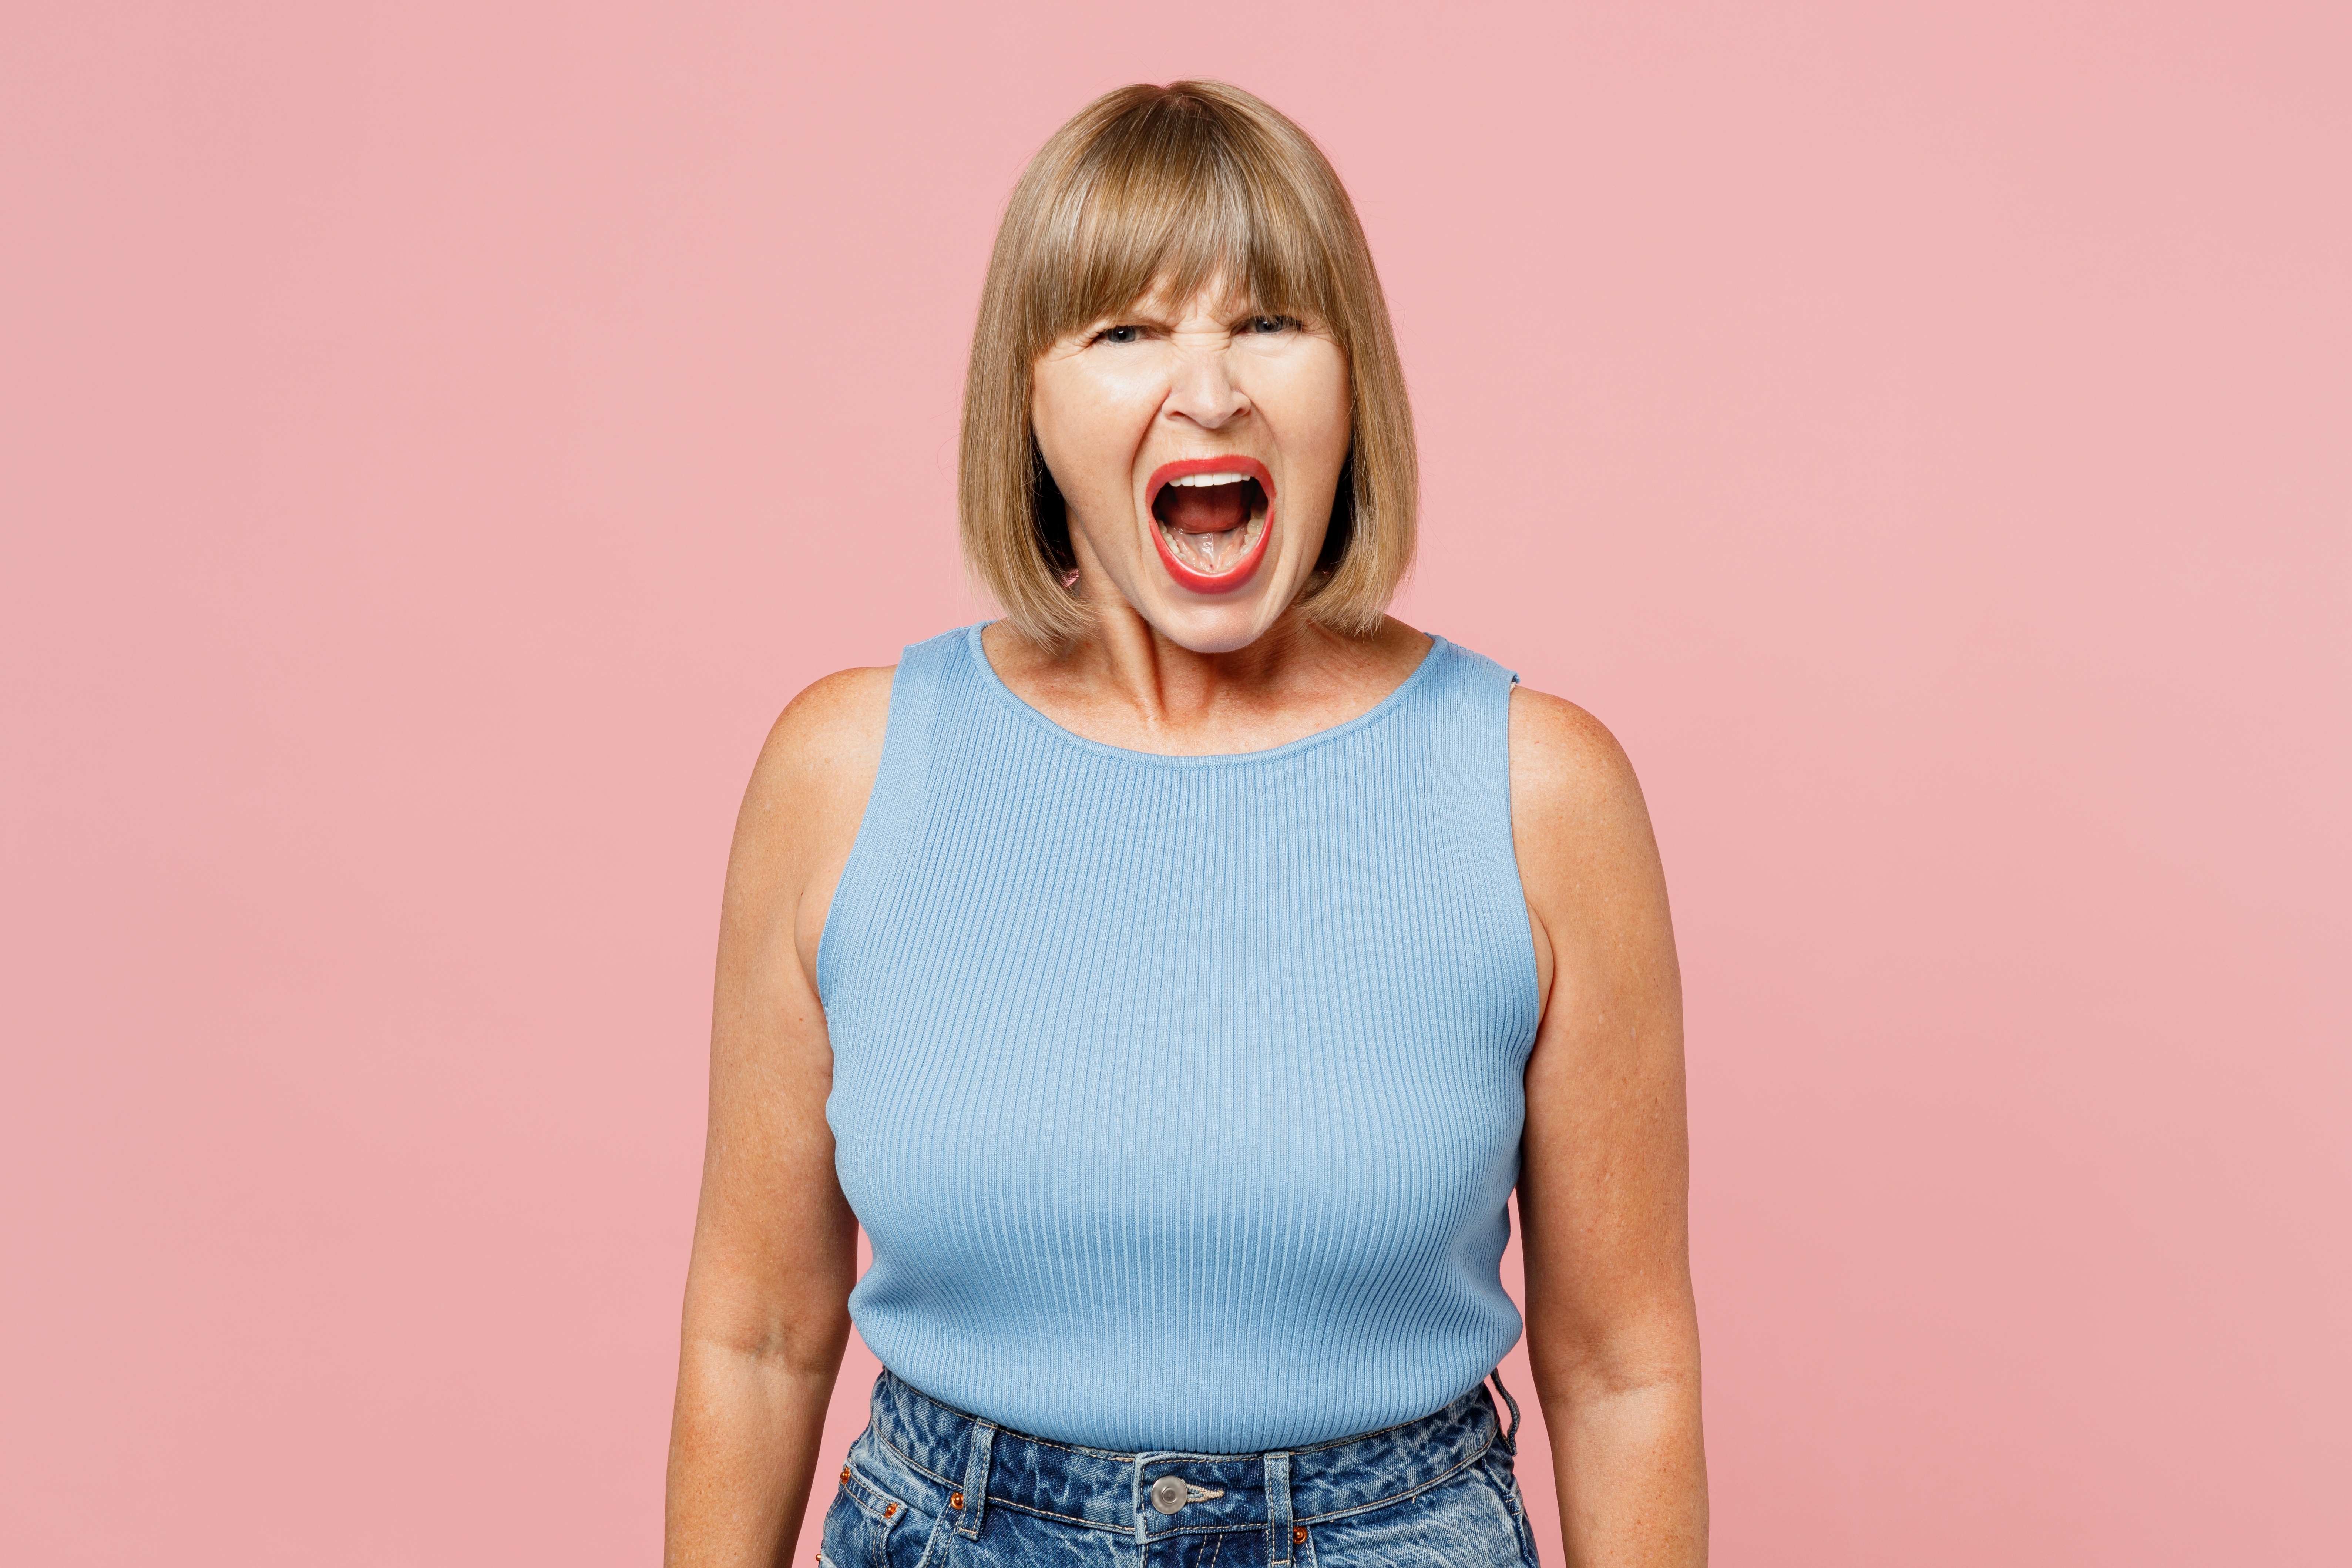 An angry woman in her 50s | Source: Shutterstock